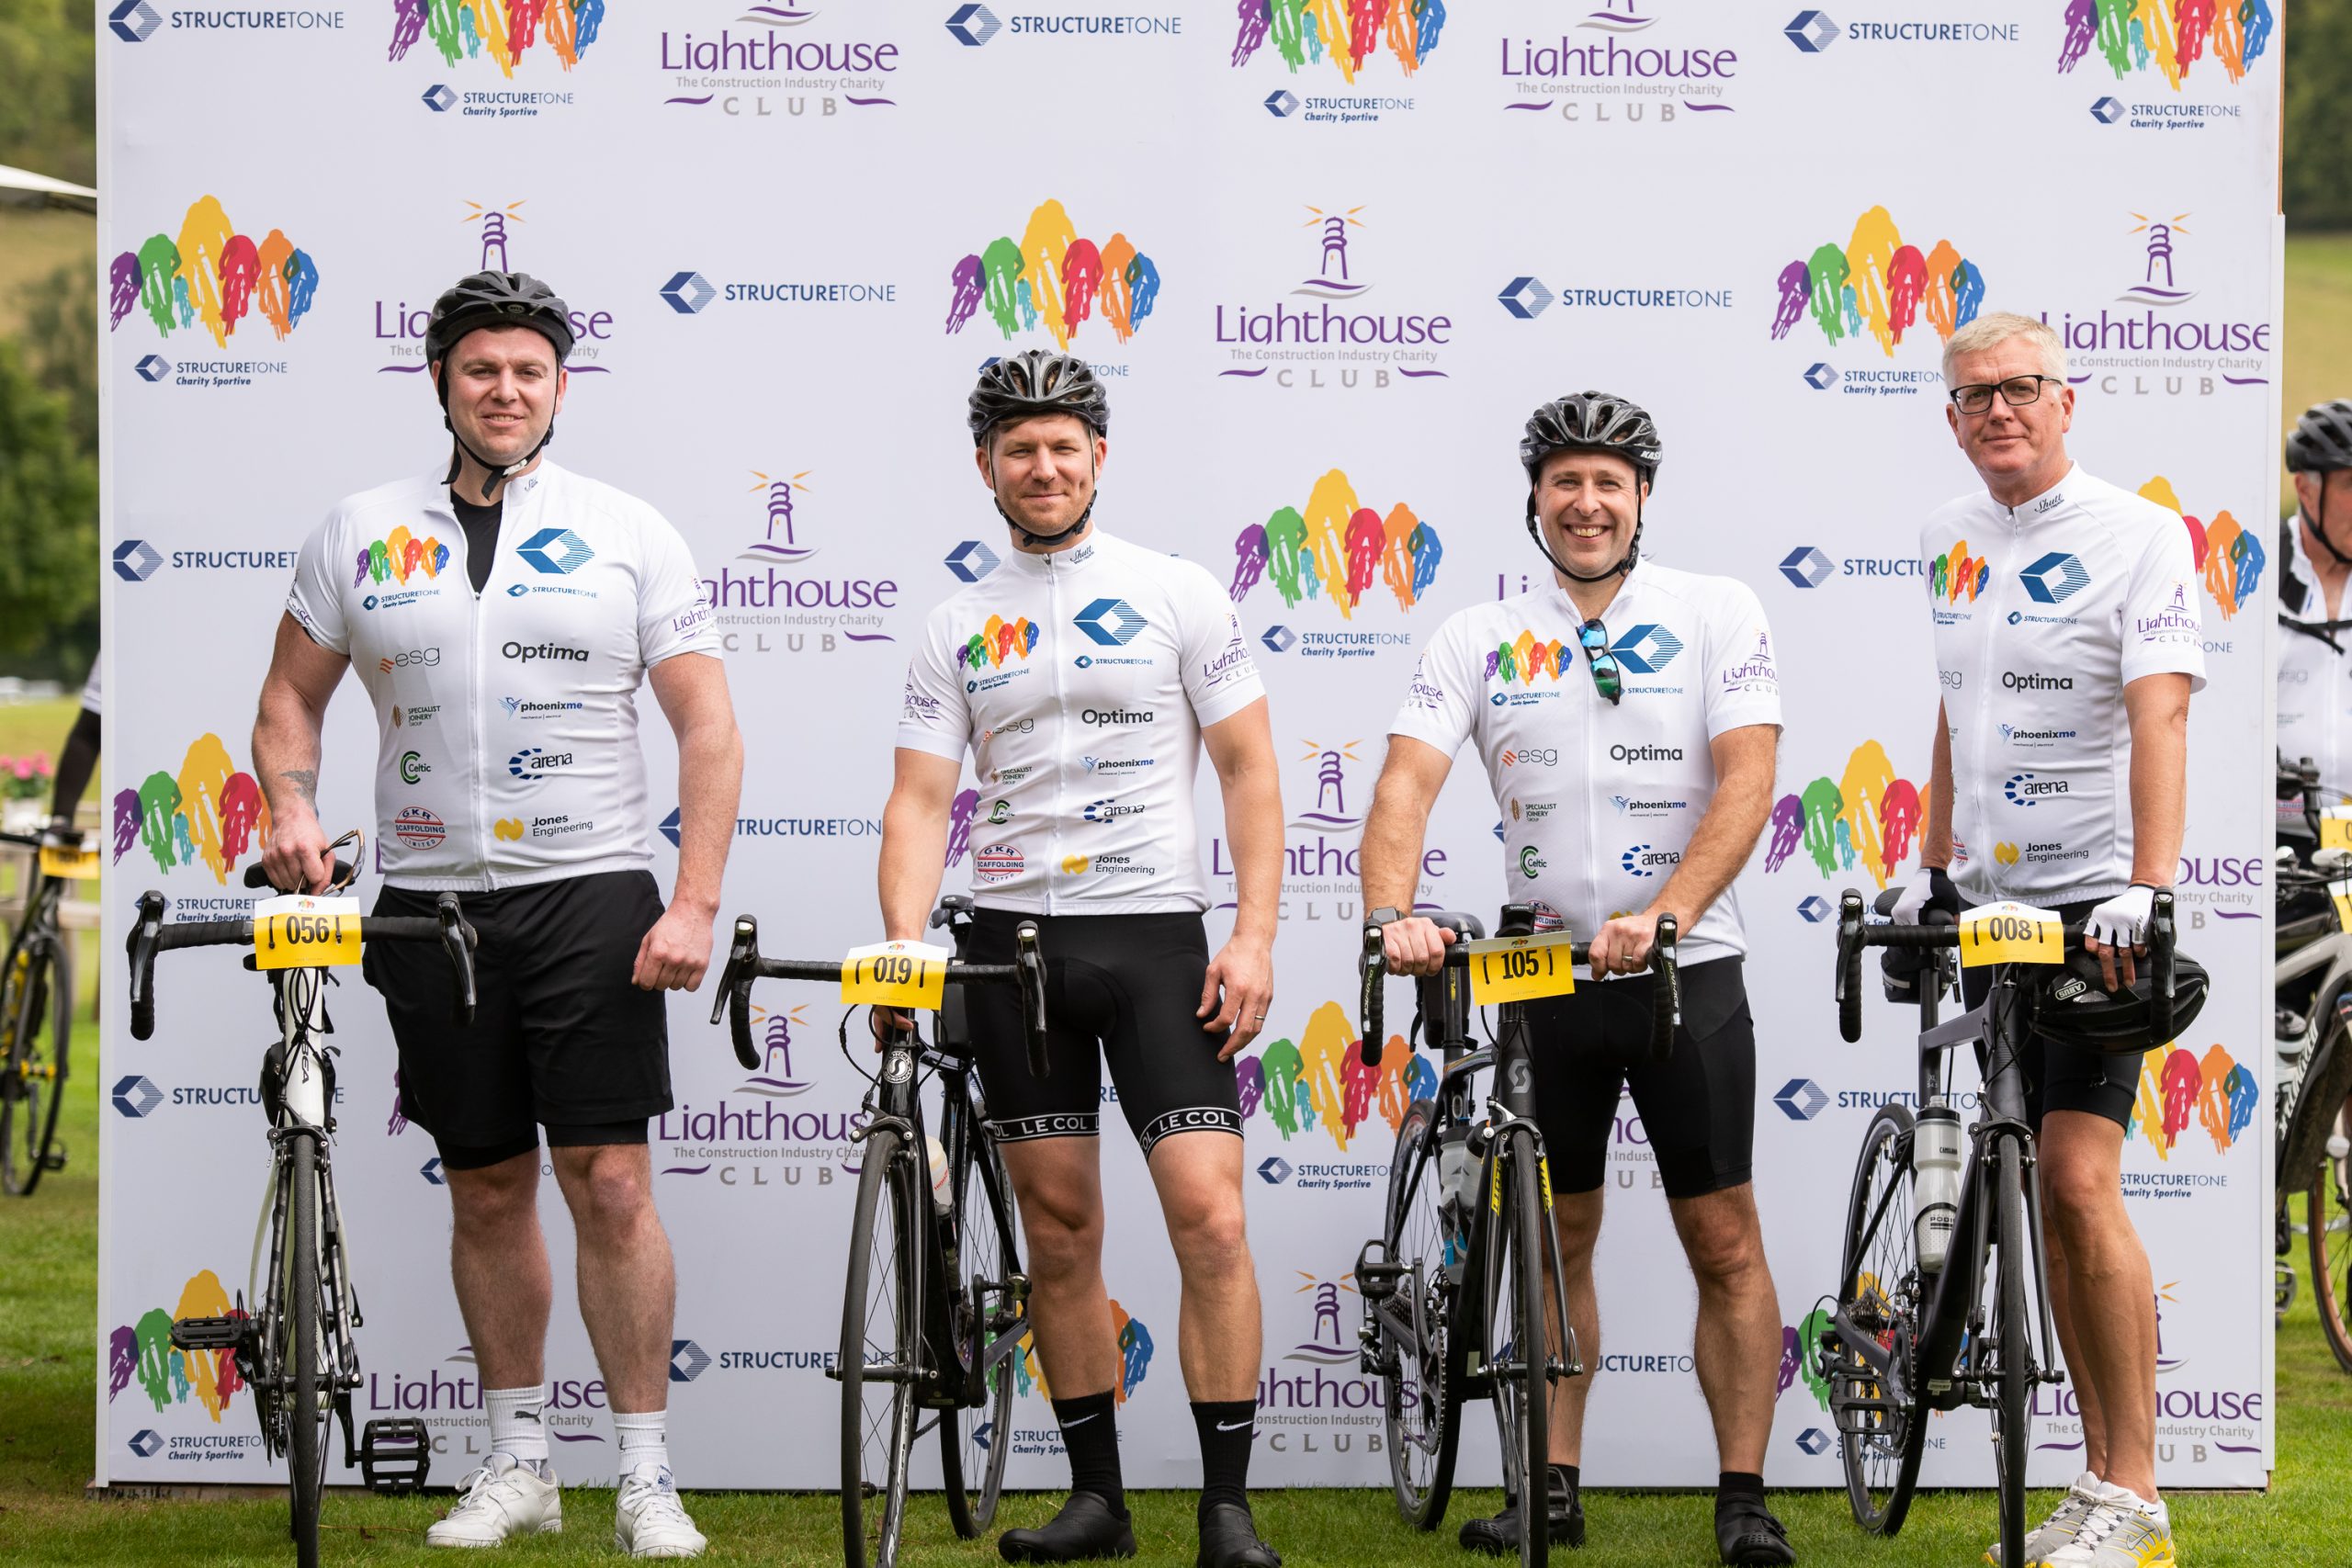 Four cyclists in matching gear smiling for a photo with their bikes.